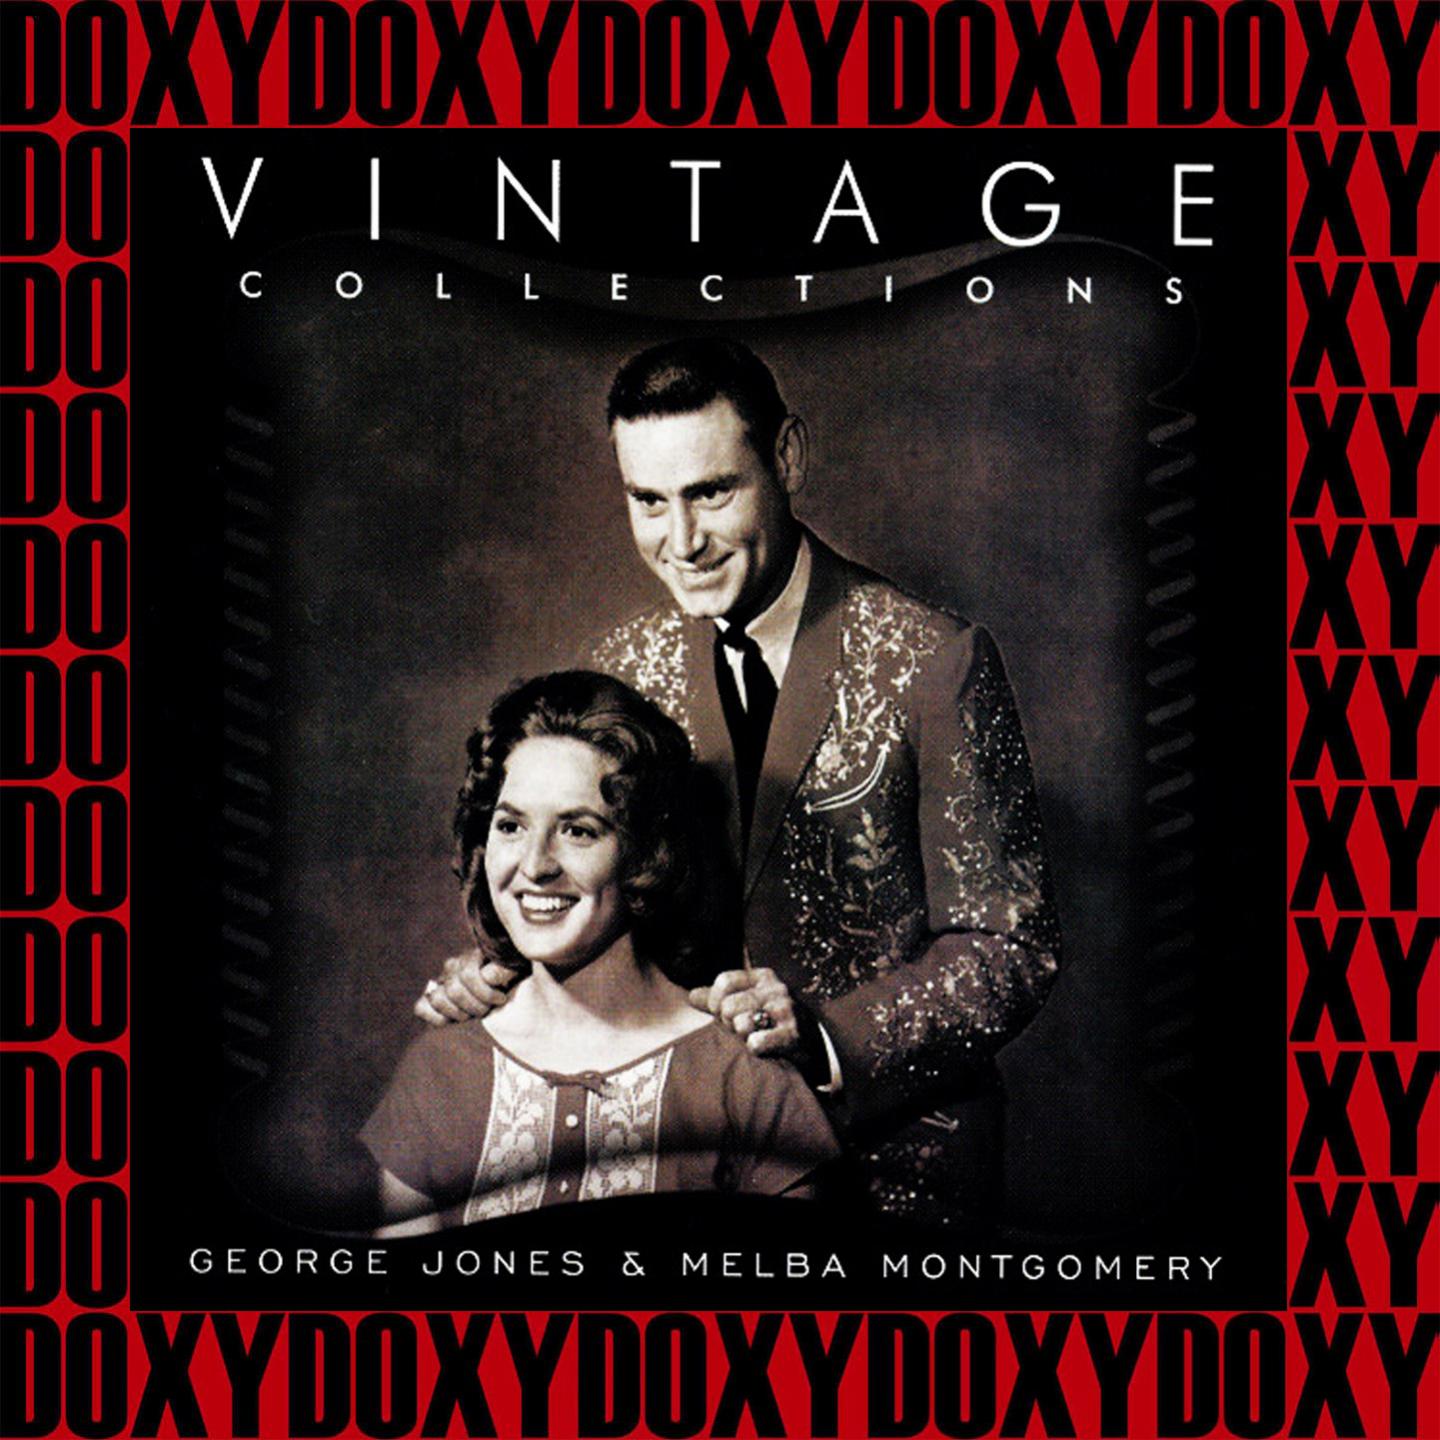 Vintage Collections Series (Remastered Version) (Doxy Collection)